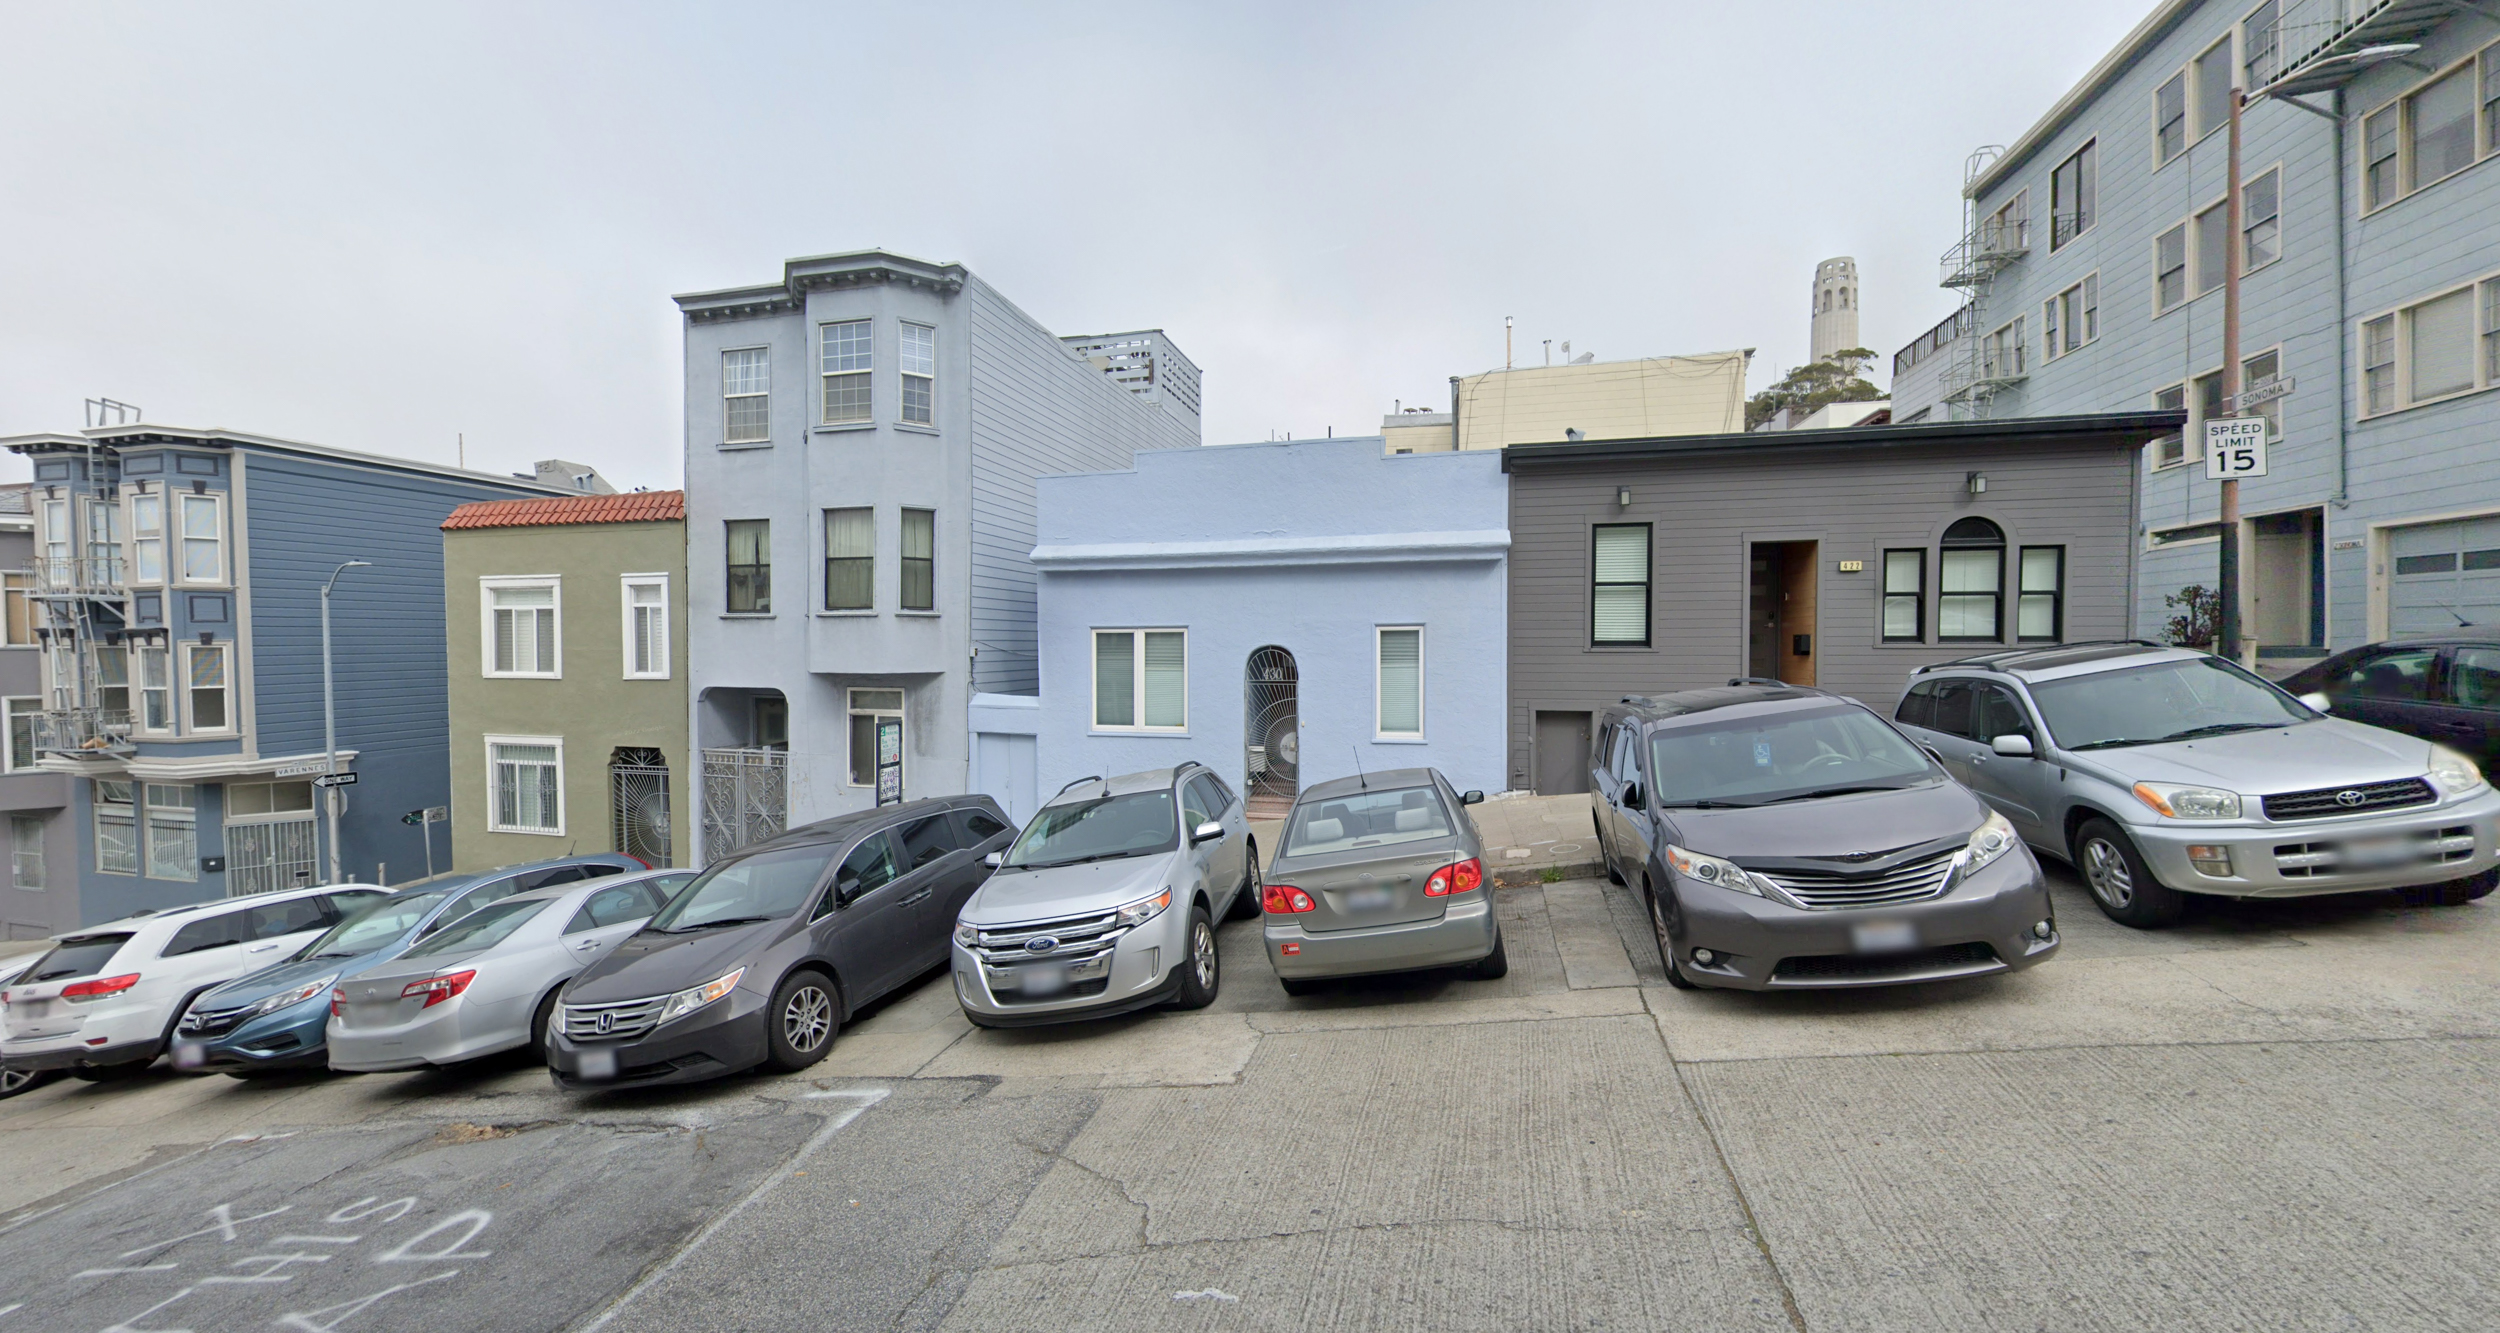 430 Green Street existing condition, image via Google Street View